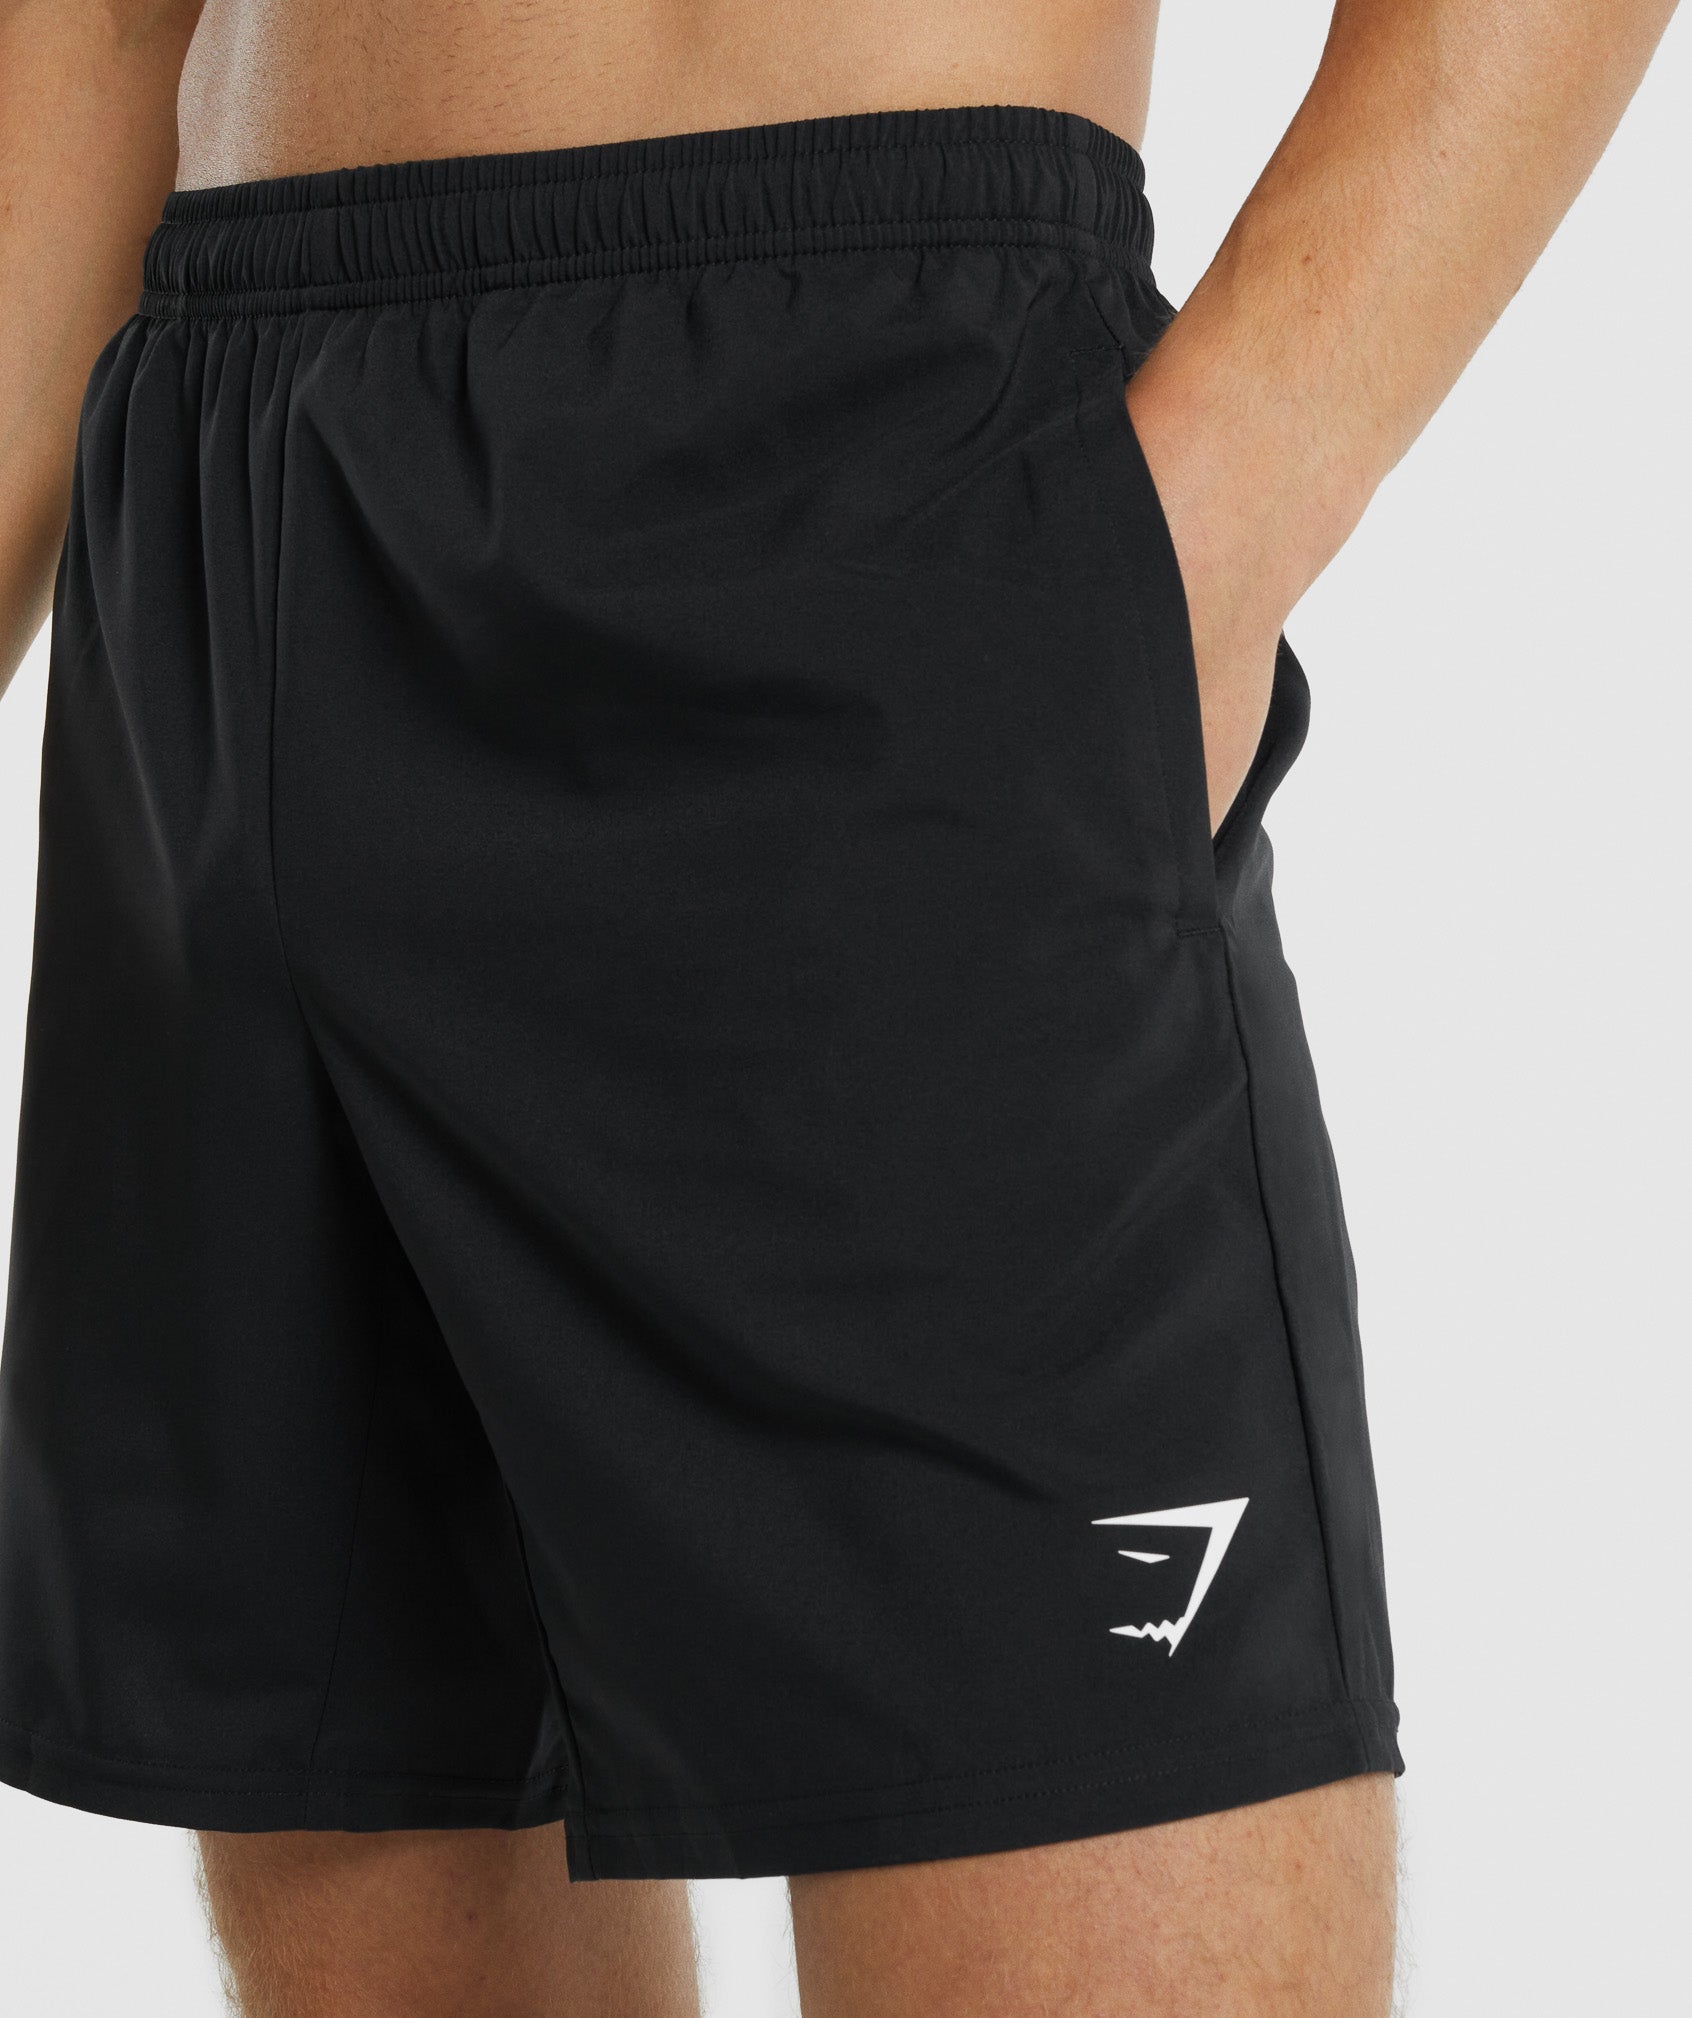 Arrival Shorts in Black - view 4